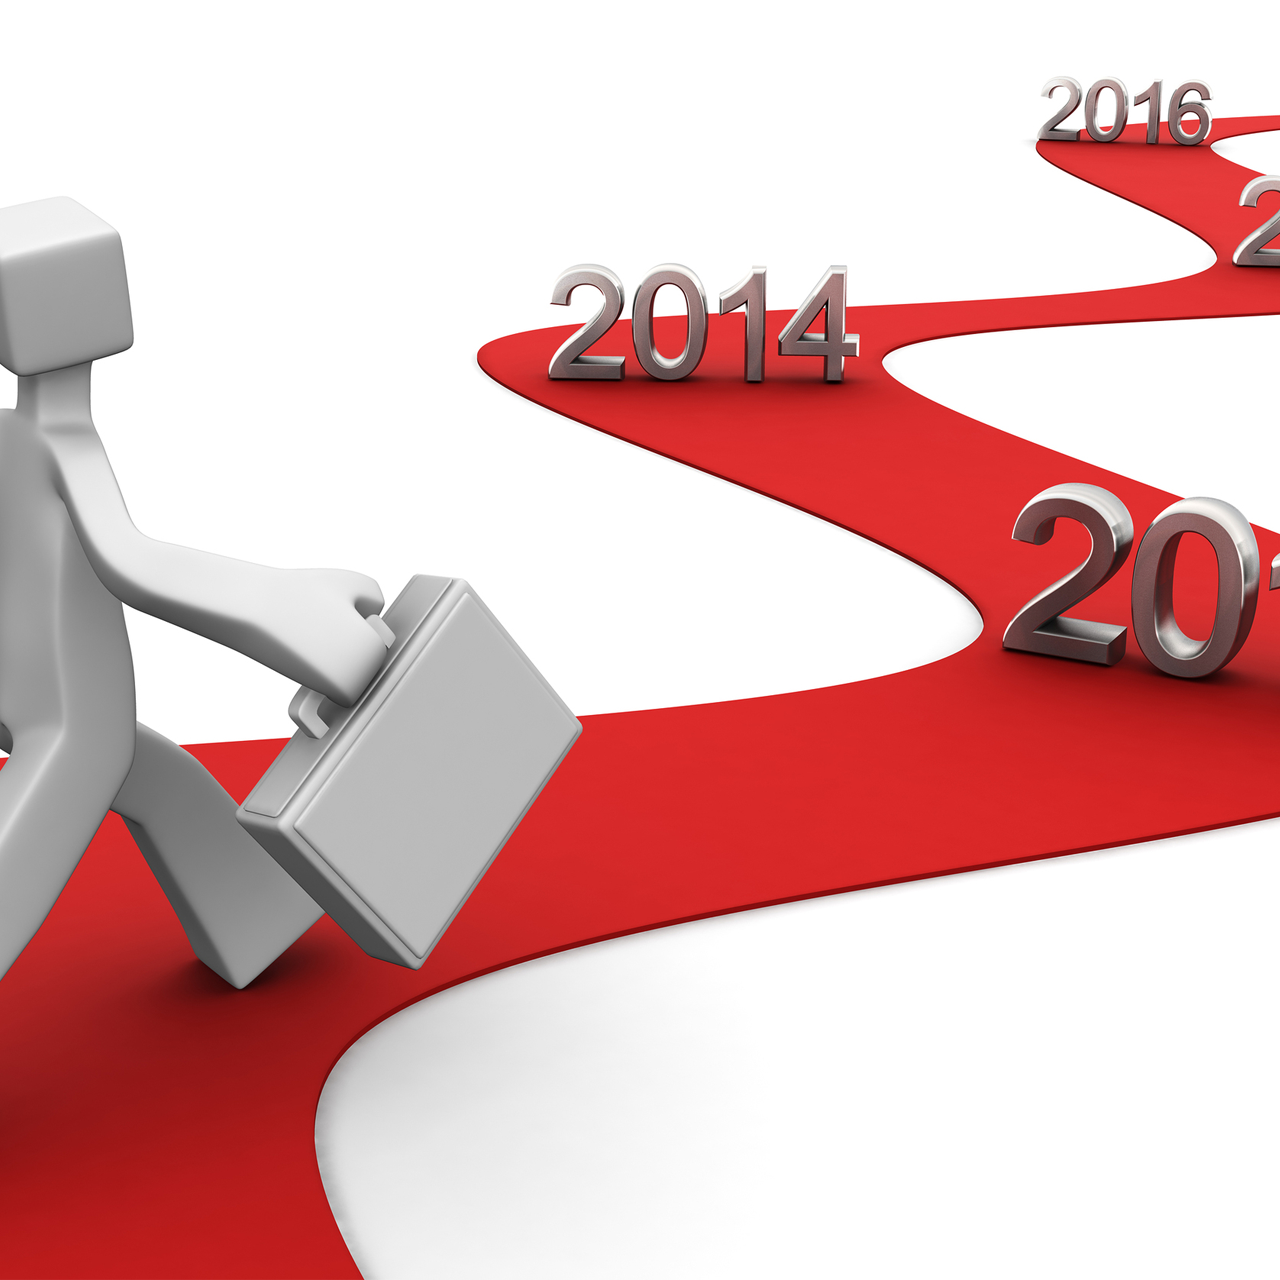 The Best Marketing Tips of 2014